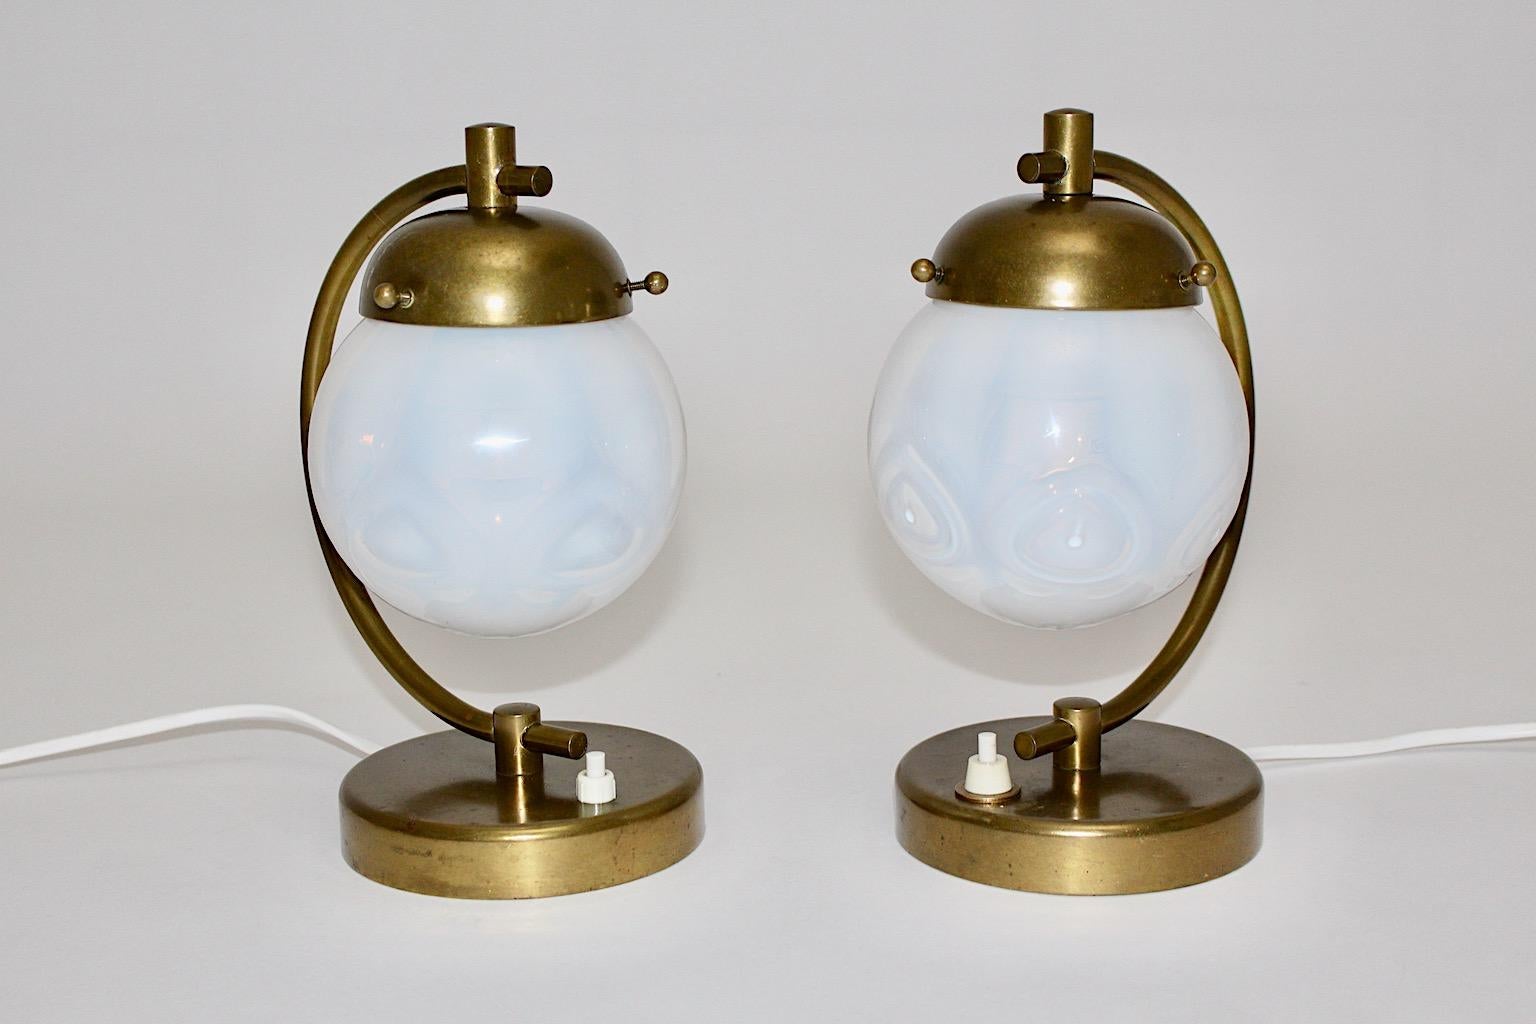 Art Deco vintage pair of table lamps or bedside lamps or sconces from brass with dome glass shades from blue opaline milky glass designed and executed in Austria 1930s.
While the amazing blue opaline glass shades dome like are fitted with three ball